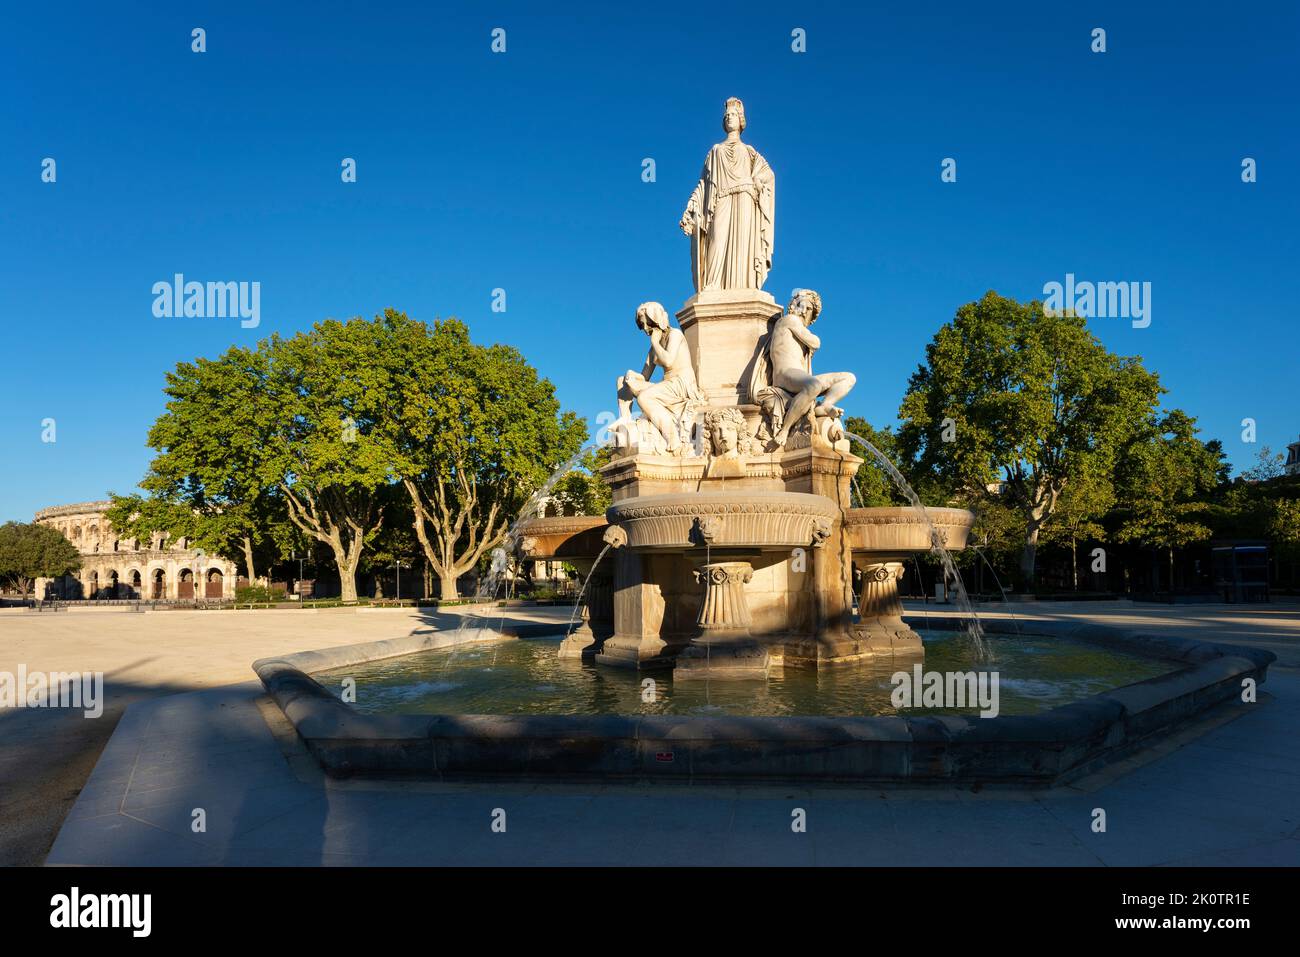 View of famous fountain in Nimes, France Stock Photo